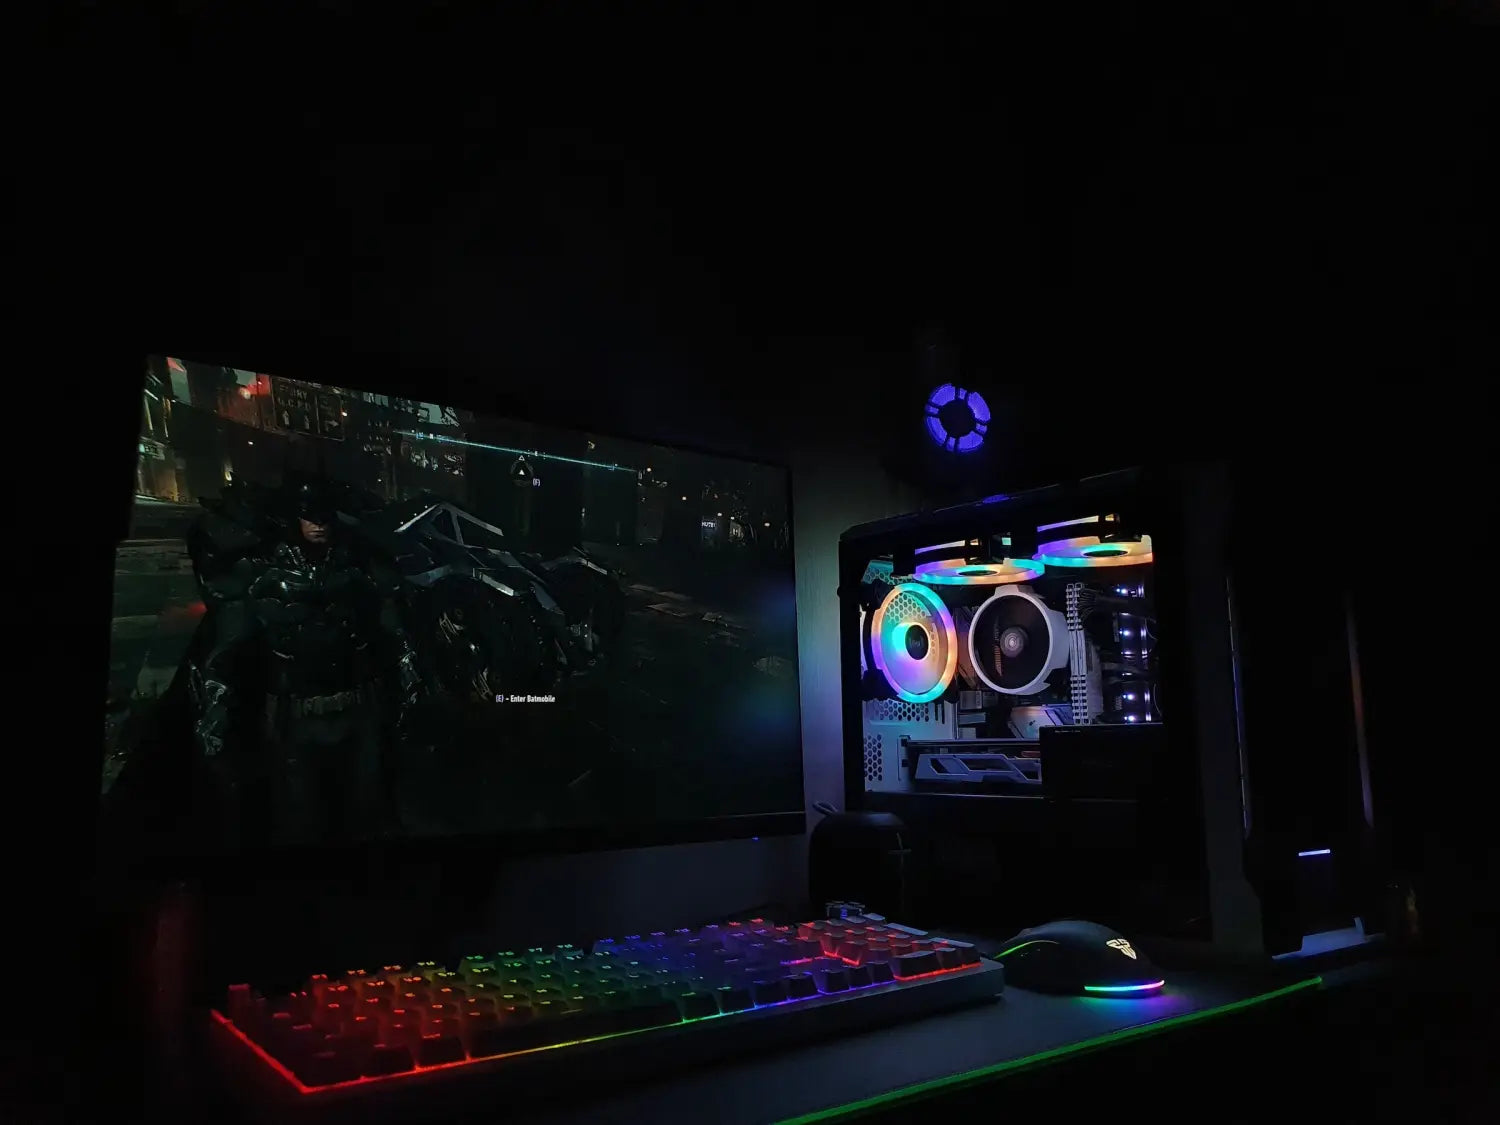 Games are getting bigger. Can your PC handle them?